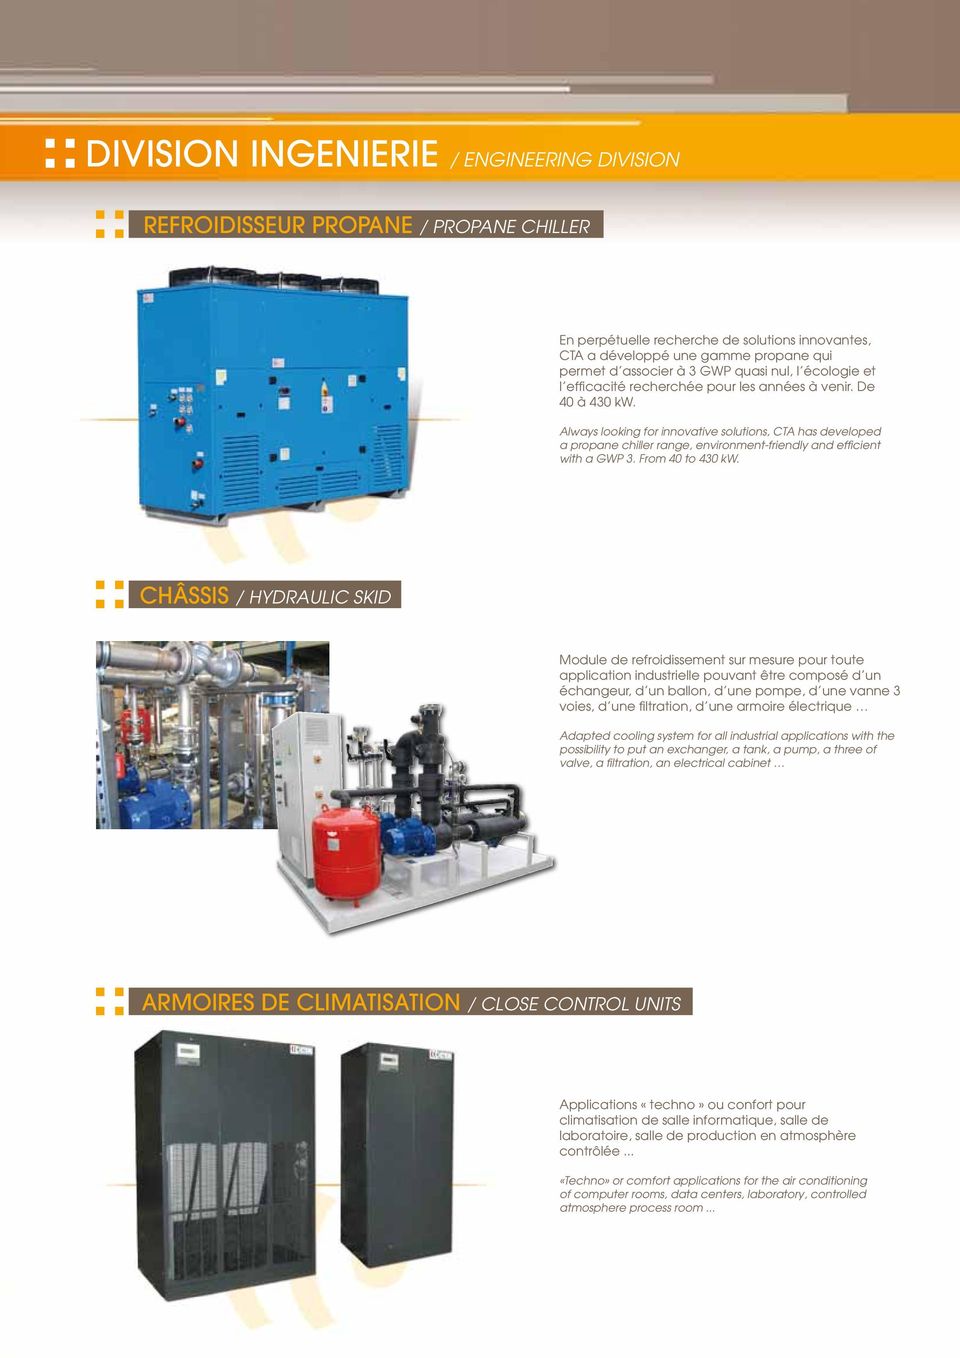 Always looking for innovative solutions, CTA has developed a propane chiller range, environment-friendly and efficient with a GWP 3. From 40 to 430 kw.